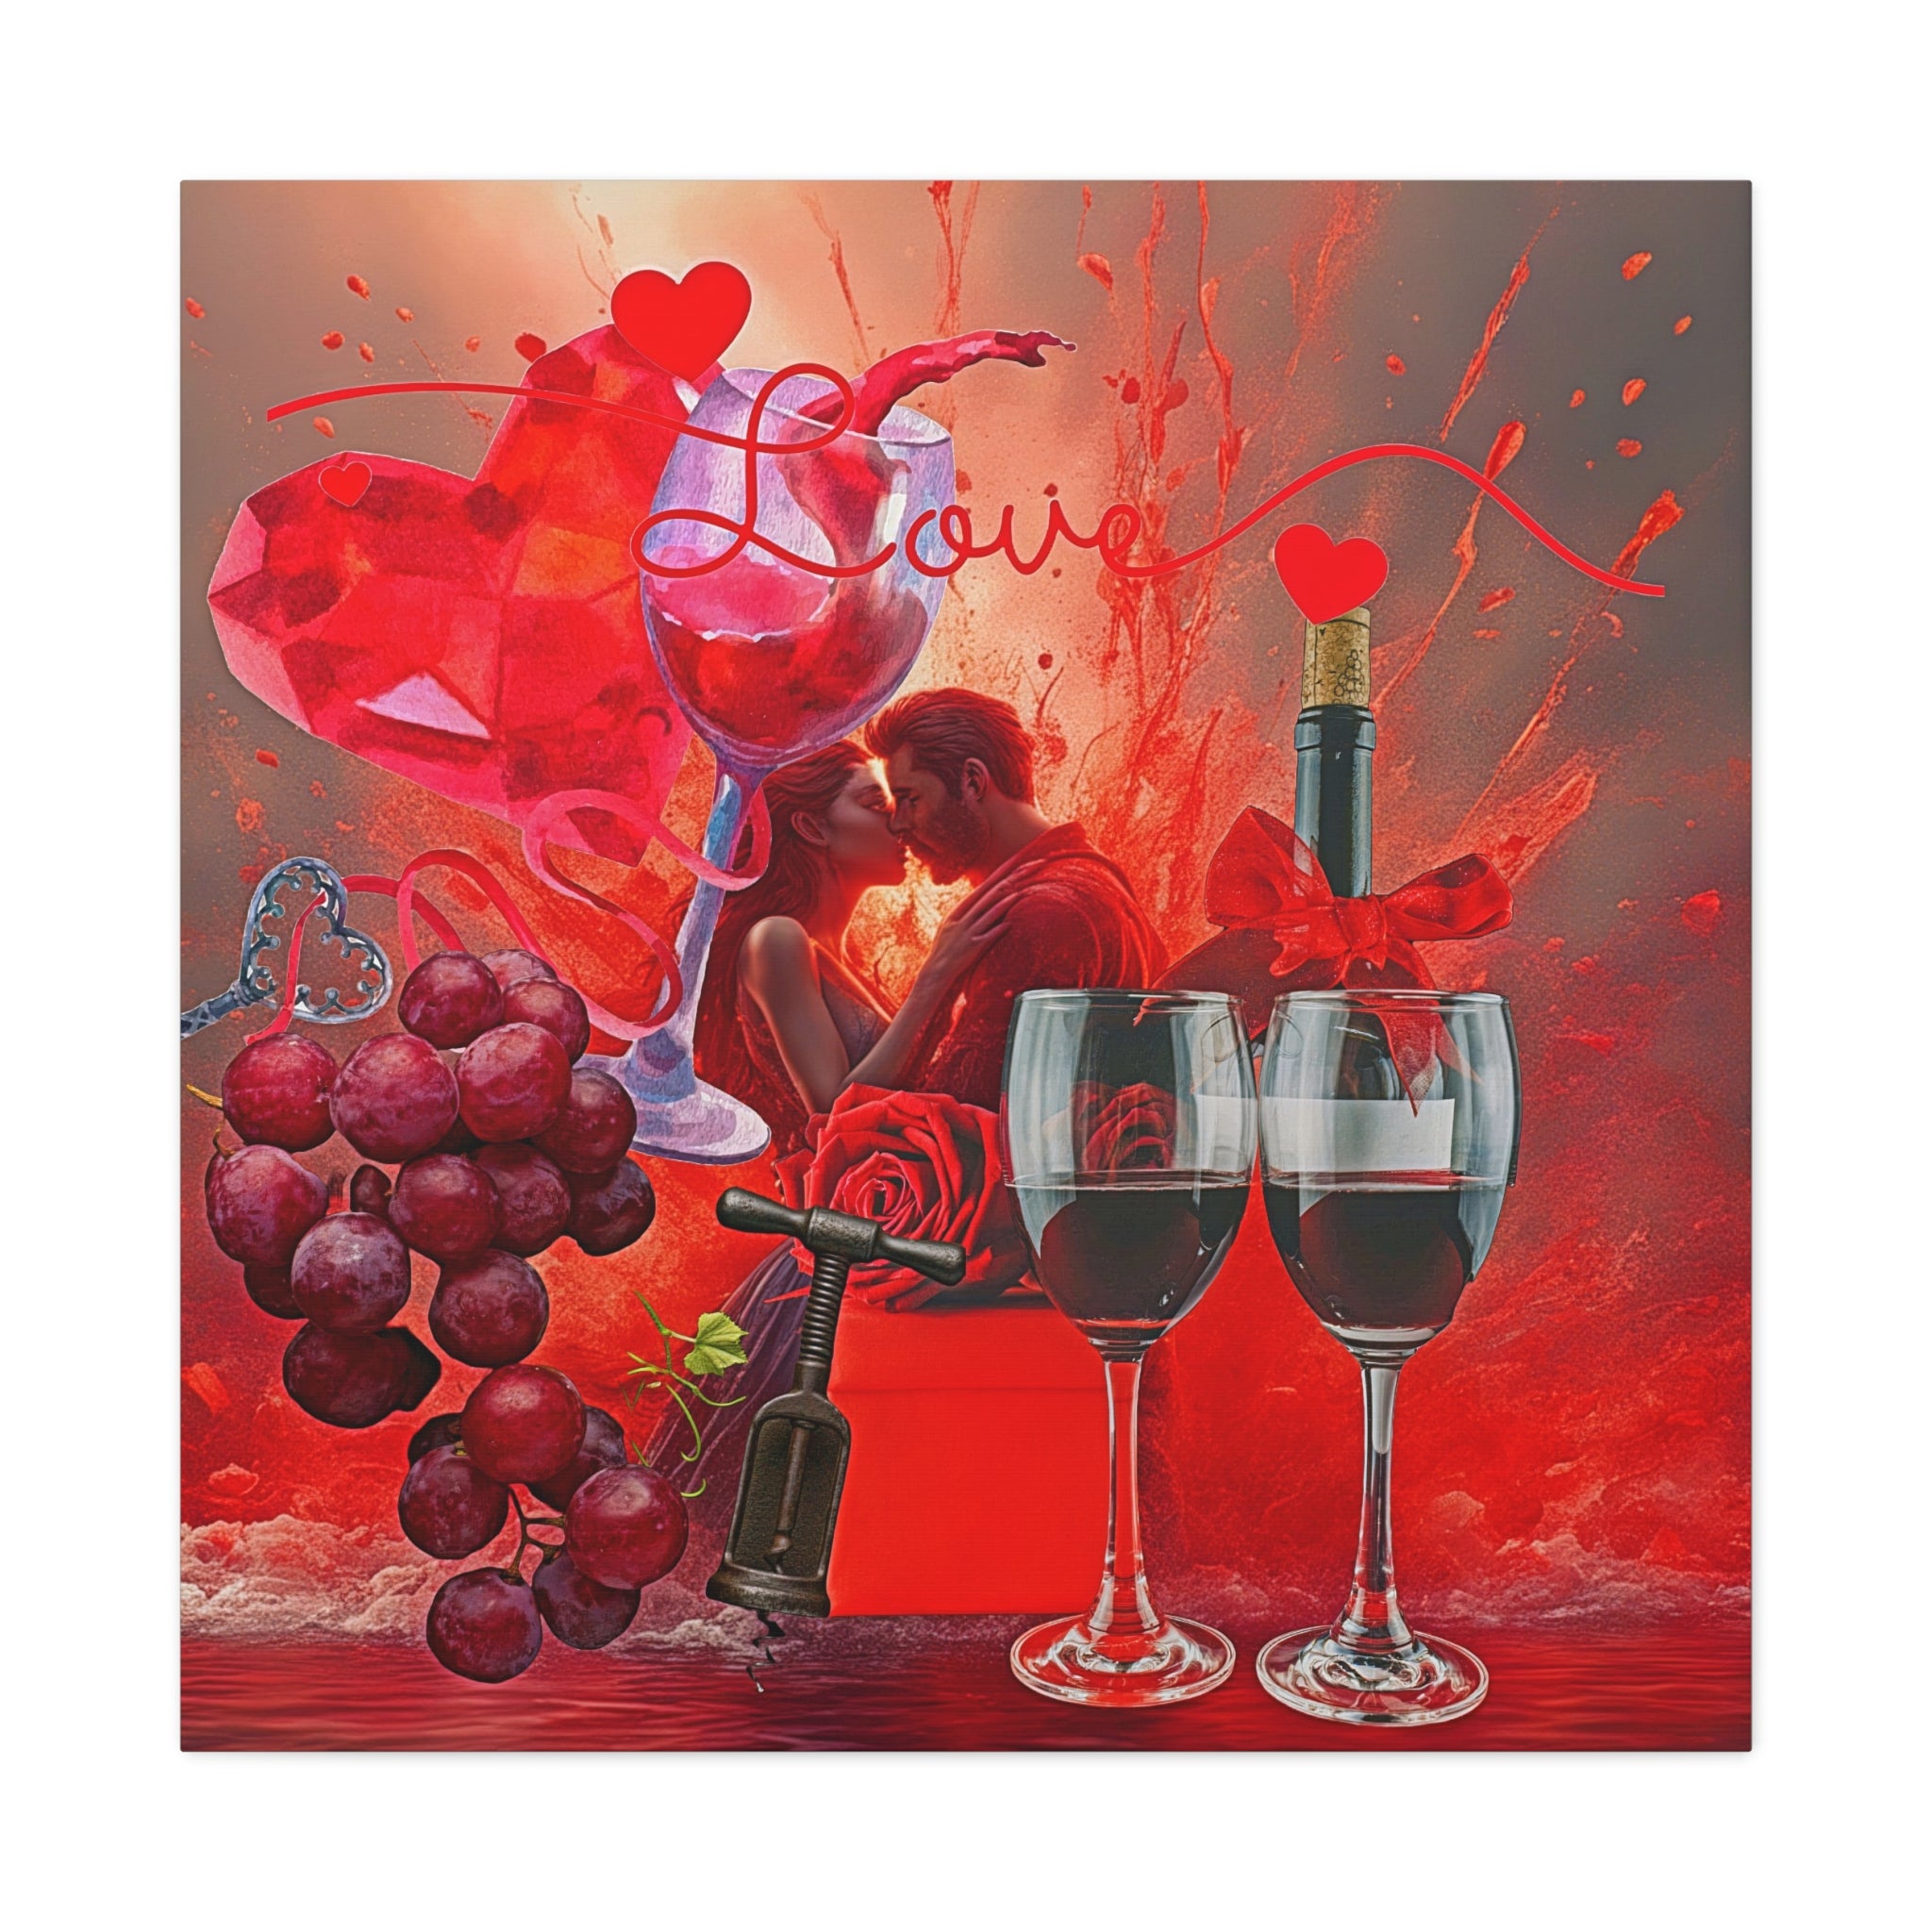 Wall Art RED WINE Canvas Print Painting Original Giclee 32X32 GW Love Nice Beauty Fun Design Fit Hot House Home Office Gift Ready Hang Living